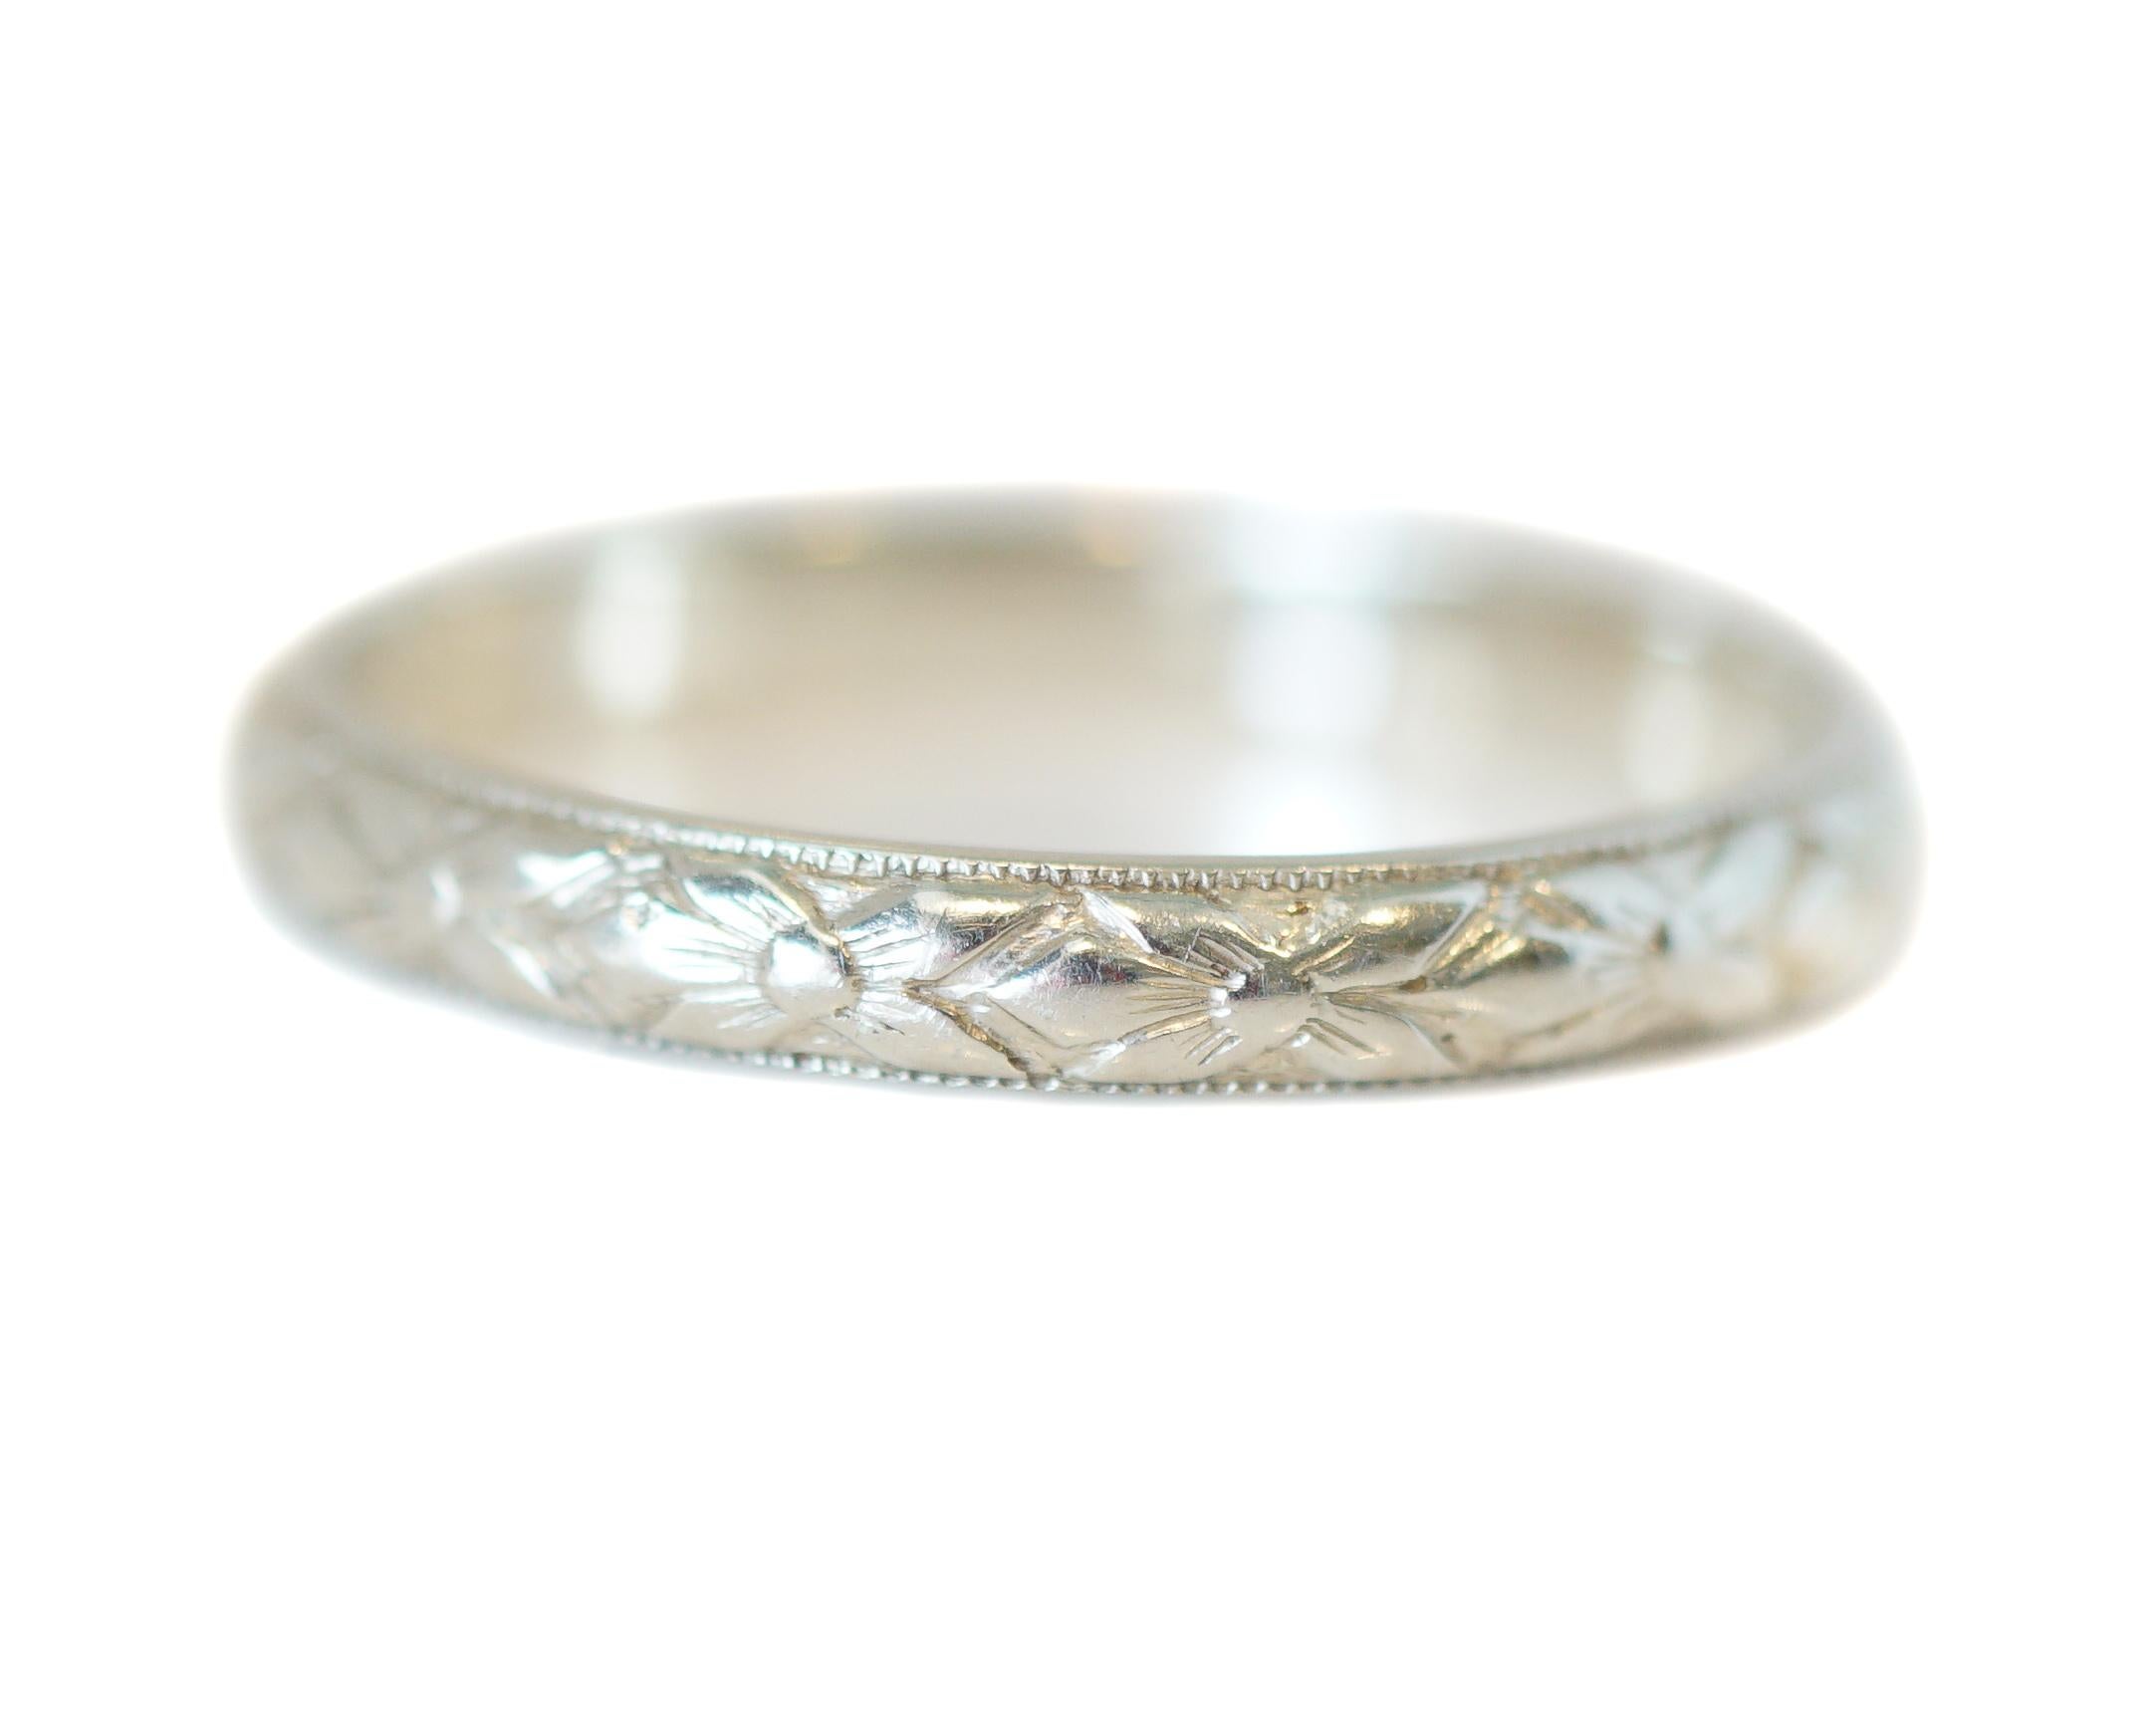 Here we have a classic, elegant, and simple style wedding band. The floral design runs around the entire band and is simple and classic, with a fine milgrain edge making for a perfect vintage band example. It is a great piece to accompany an